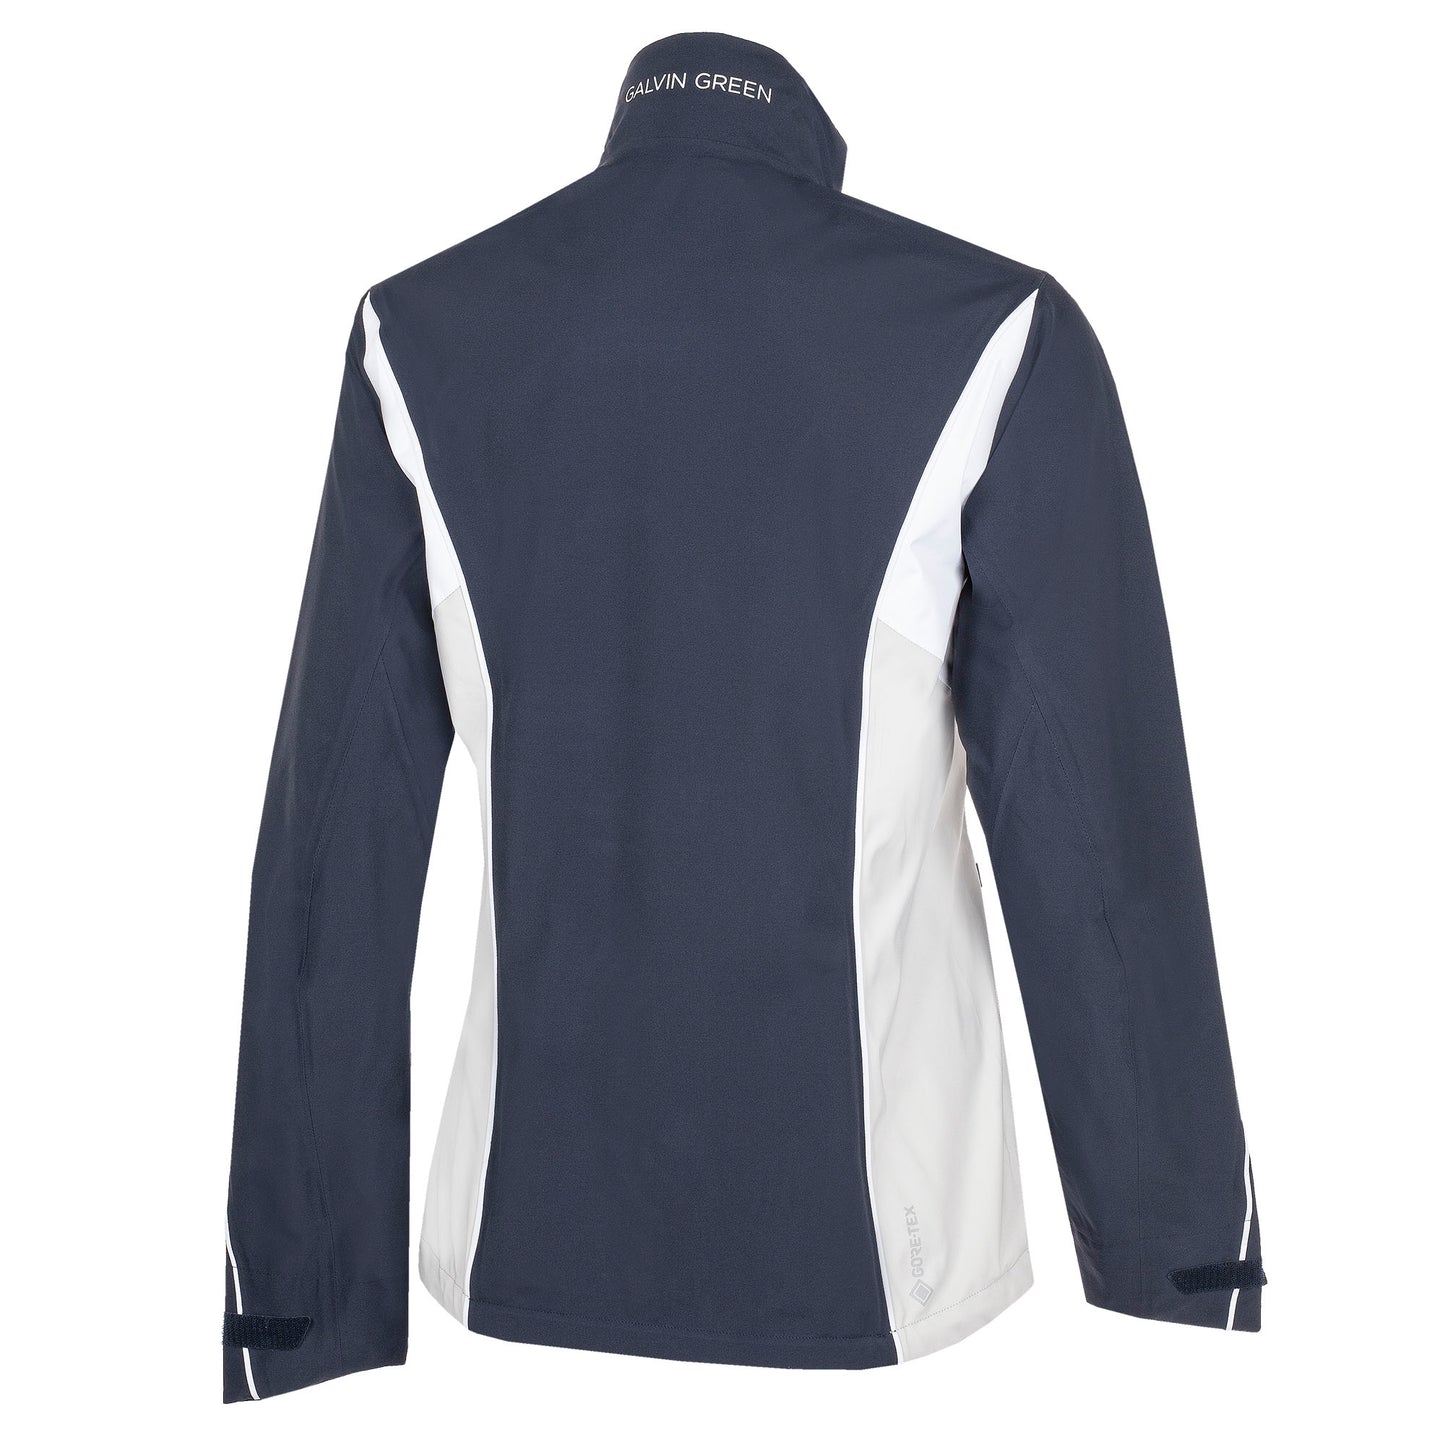 Galvin Green Ladies GORE-TEX Paclite Jacket with Contrast Panels in Navy/Cool Grey/White